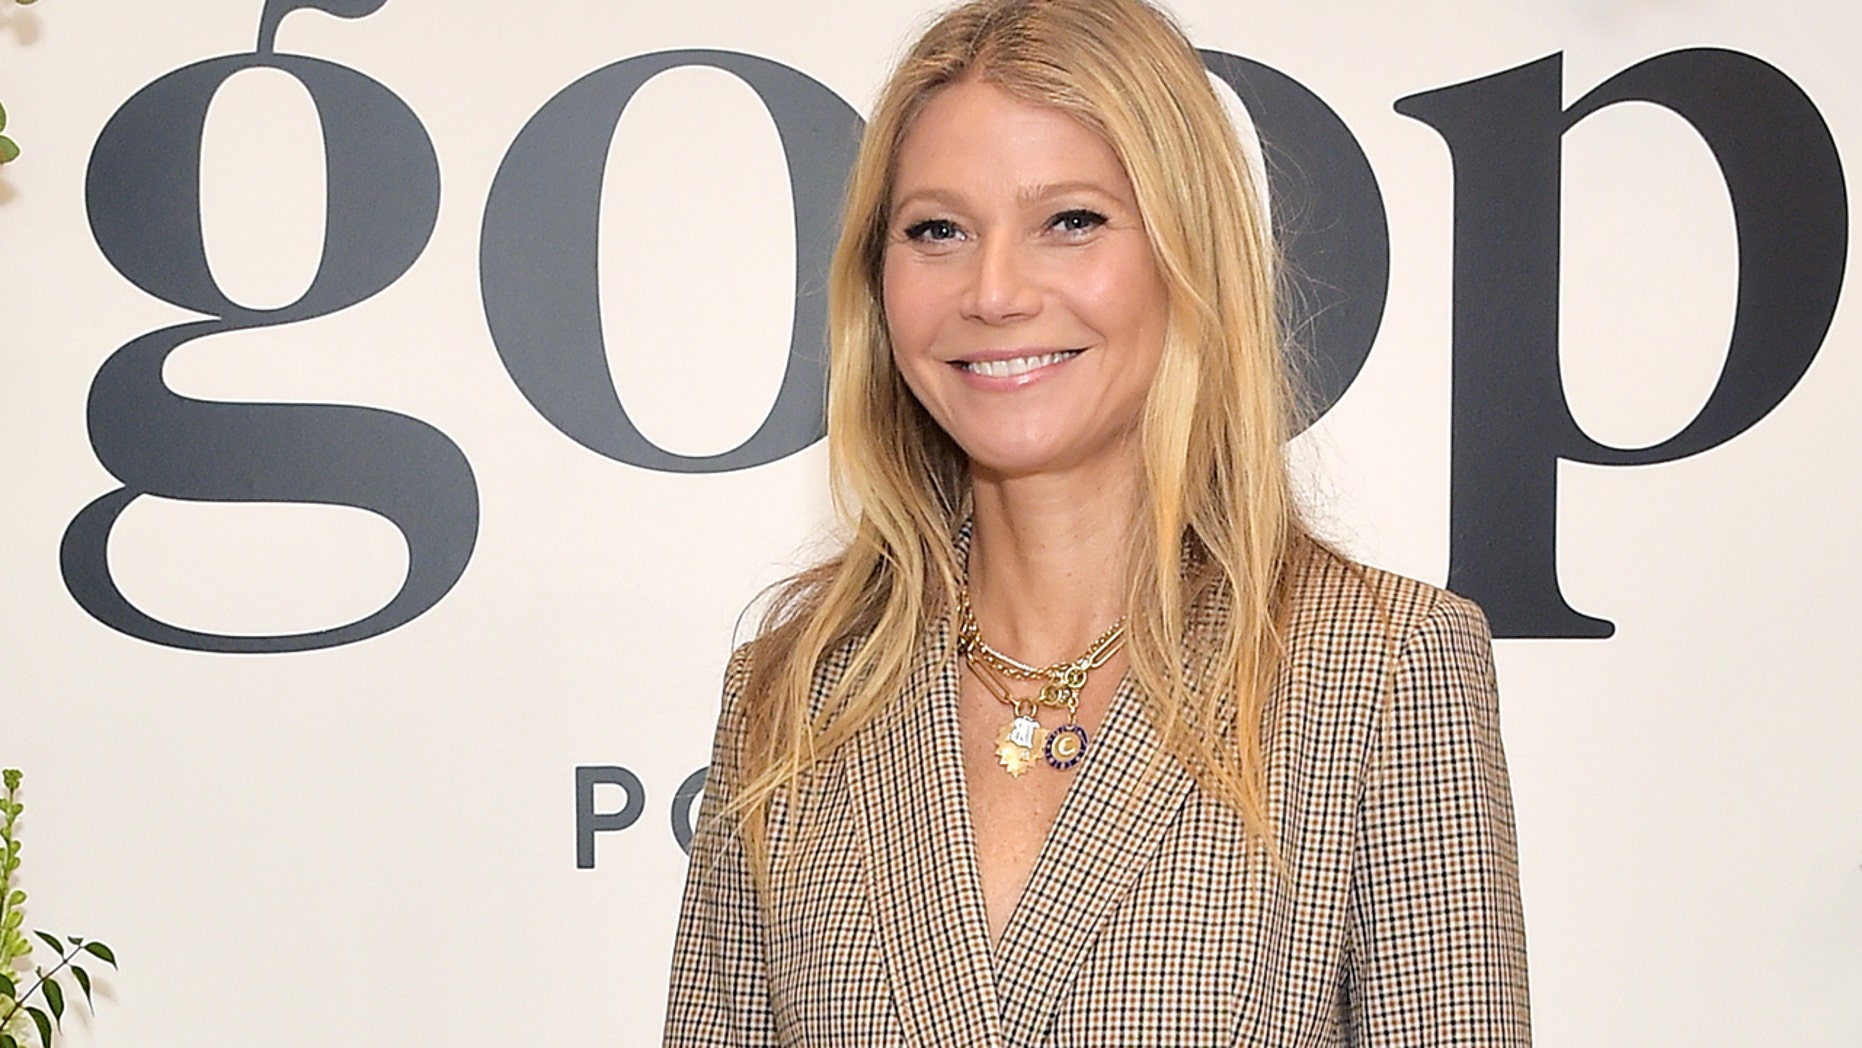 Gwenyth Paltrow, though I may just be projecting her scam company onto her performance.